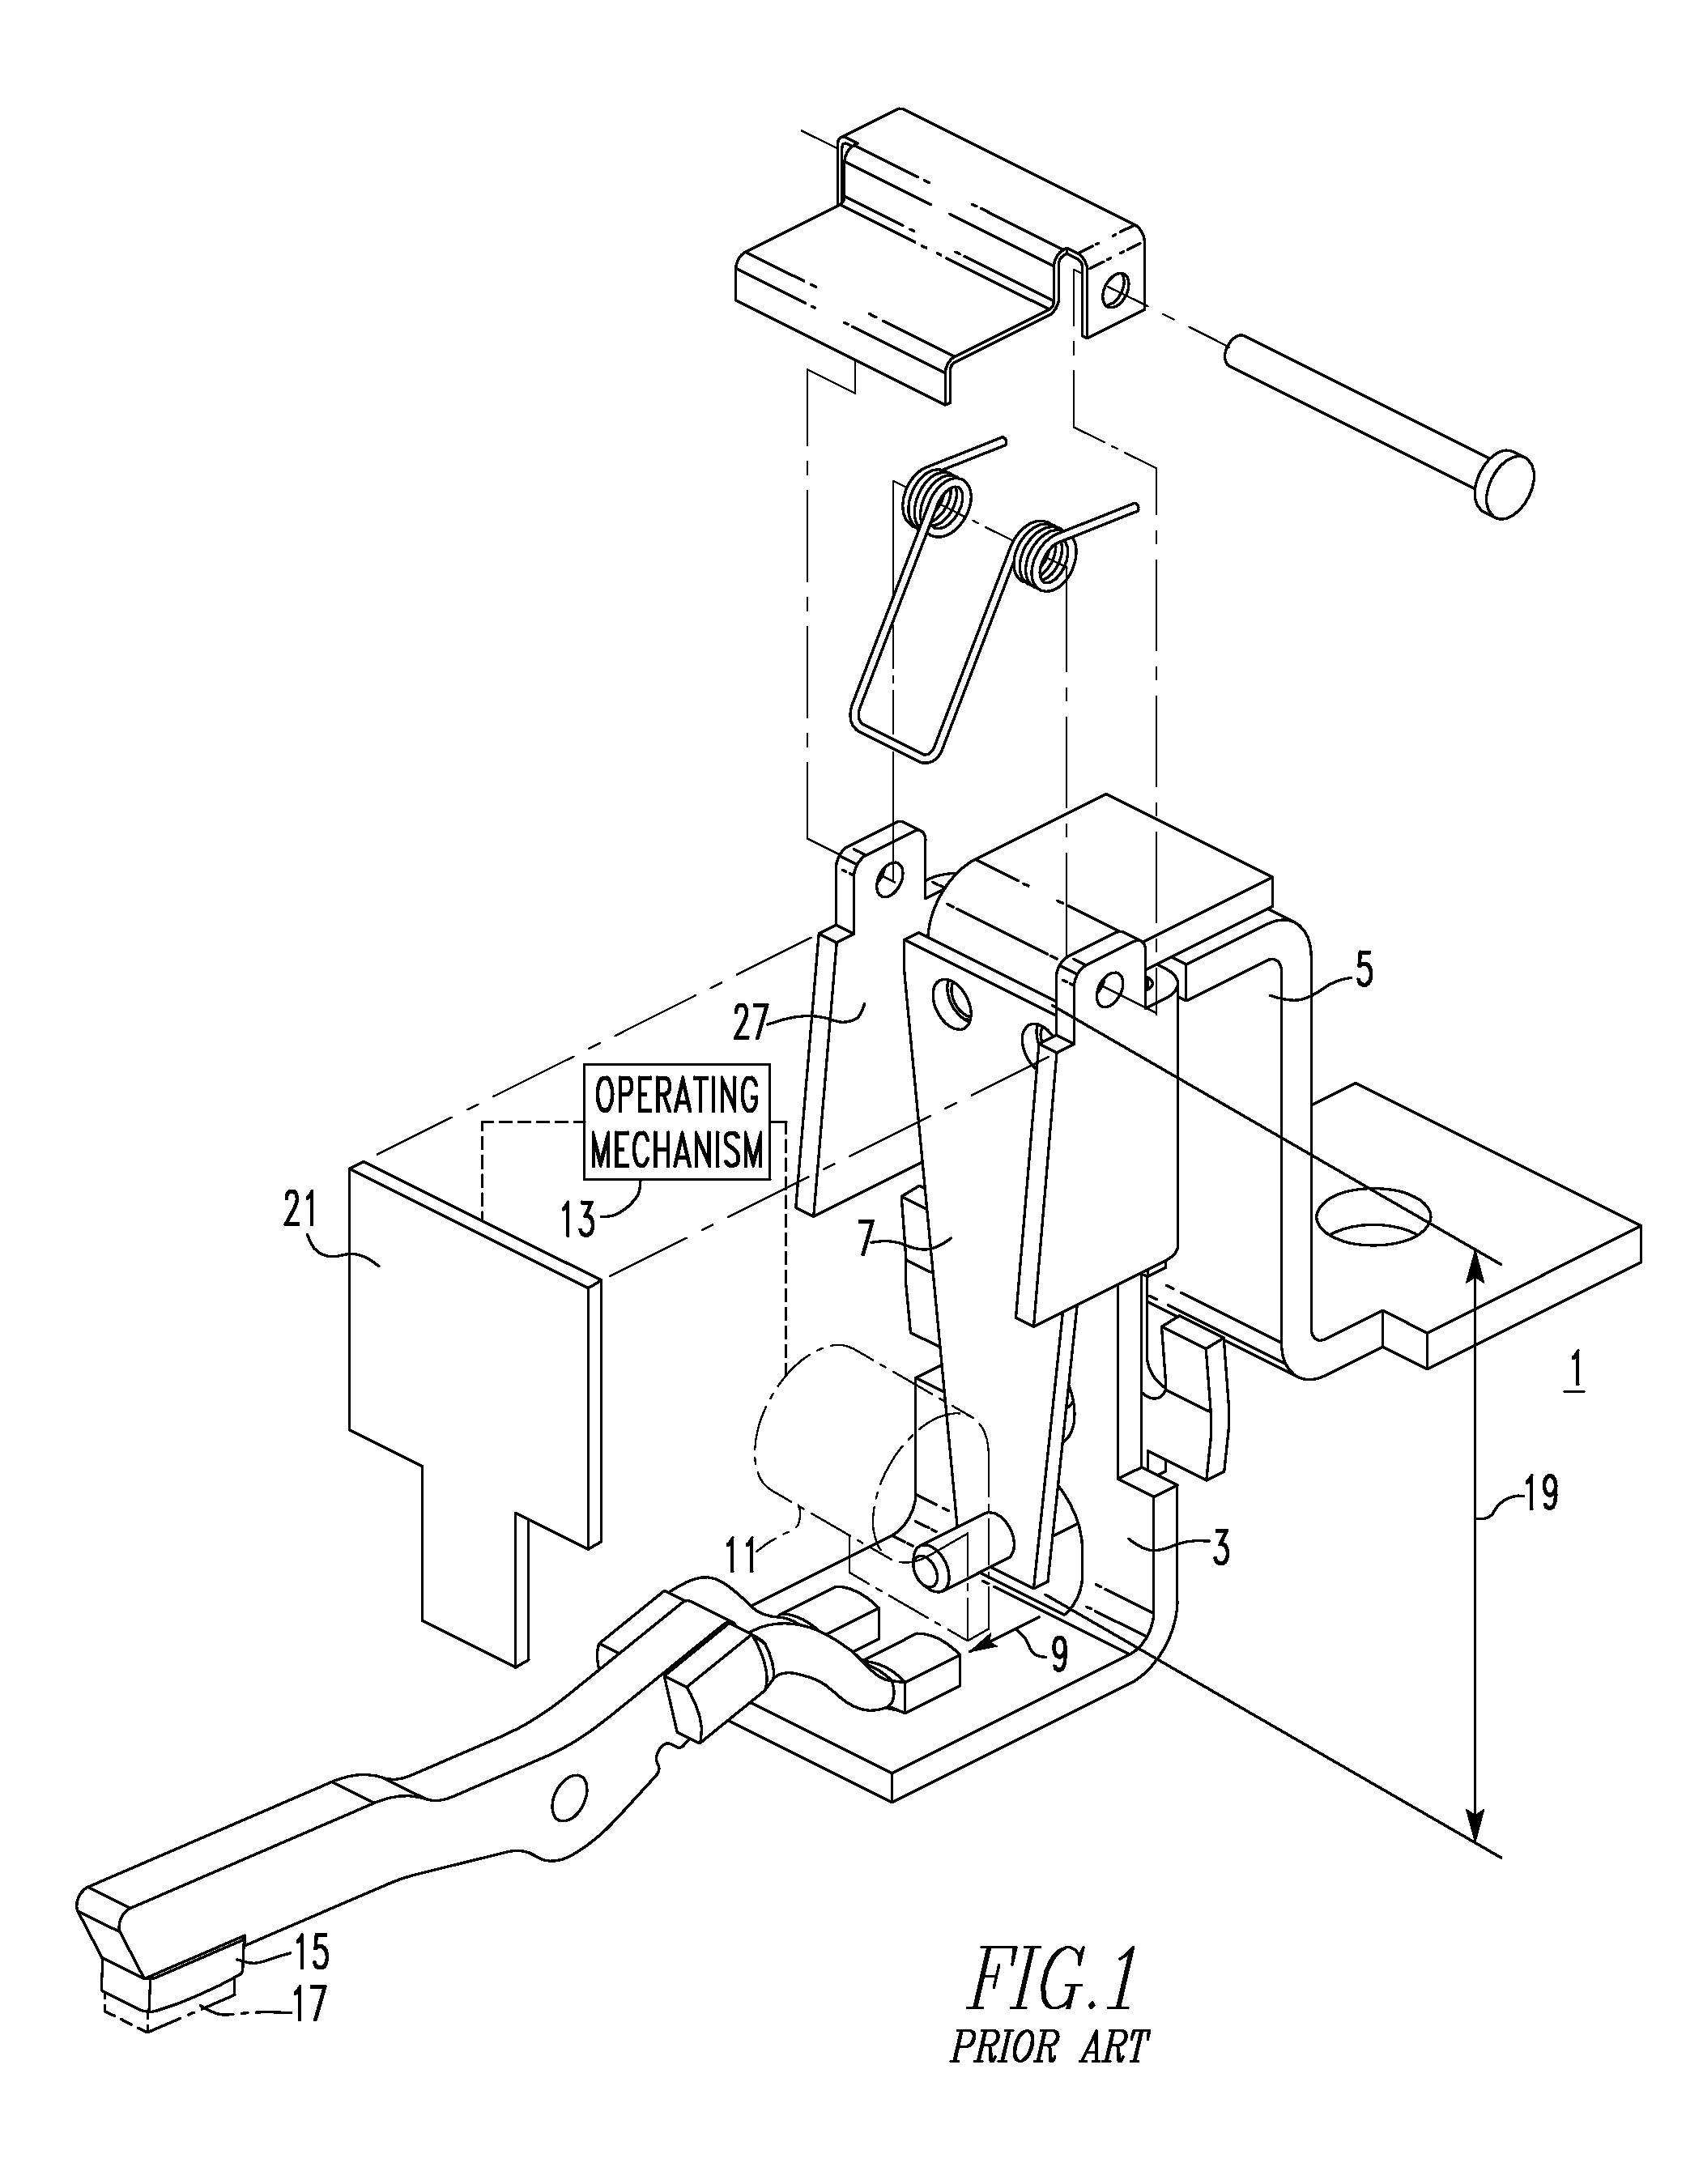 Electrical switching apparatus and heater assembly therefor